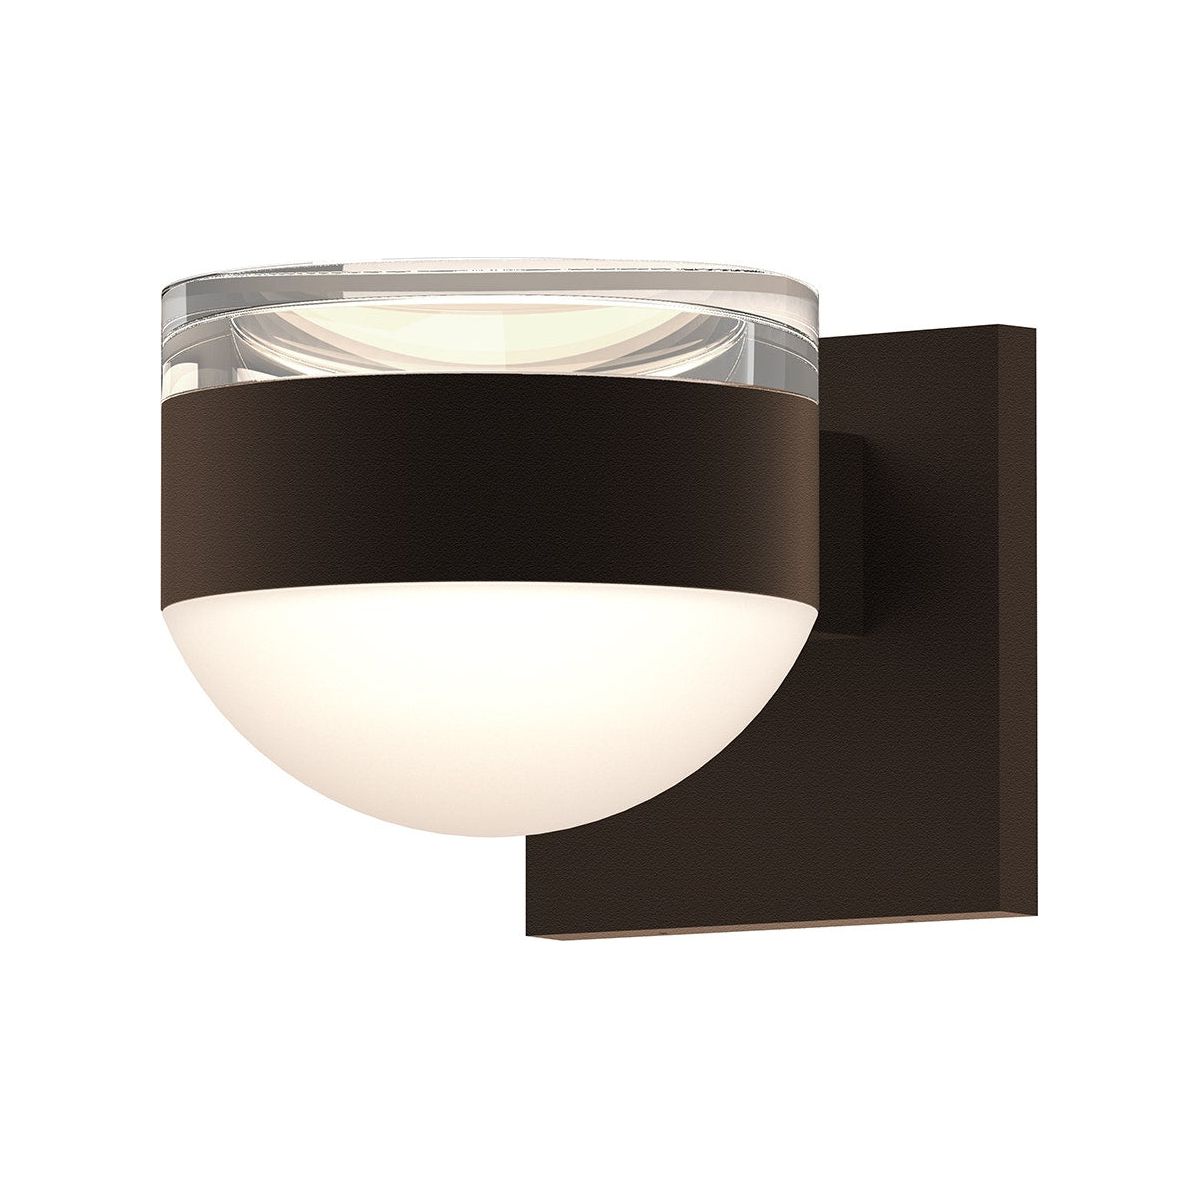 REALS Up/Down LED Sconce with Cylinder Top and Dome Bottom